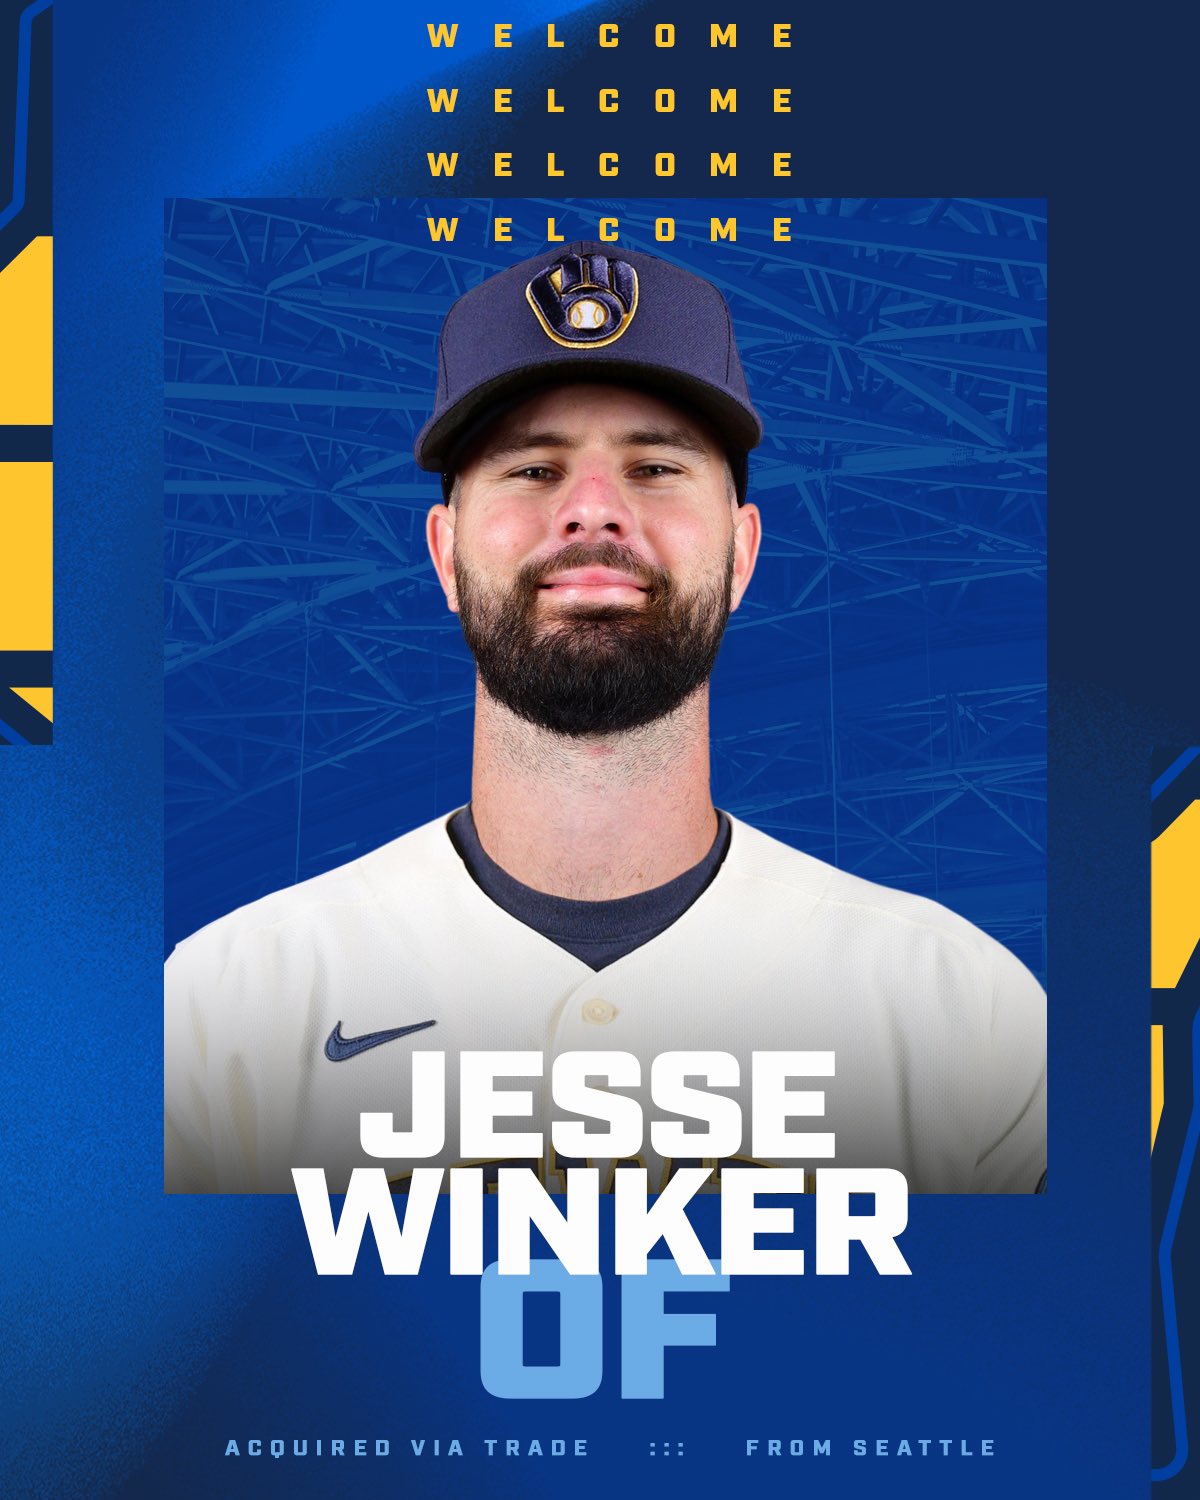 Jesse Winker returns to GABP with new perspective on last year's trade